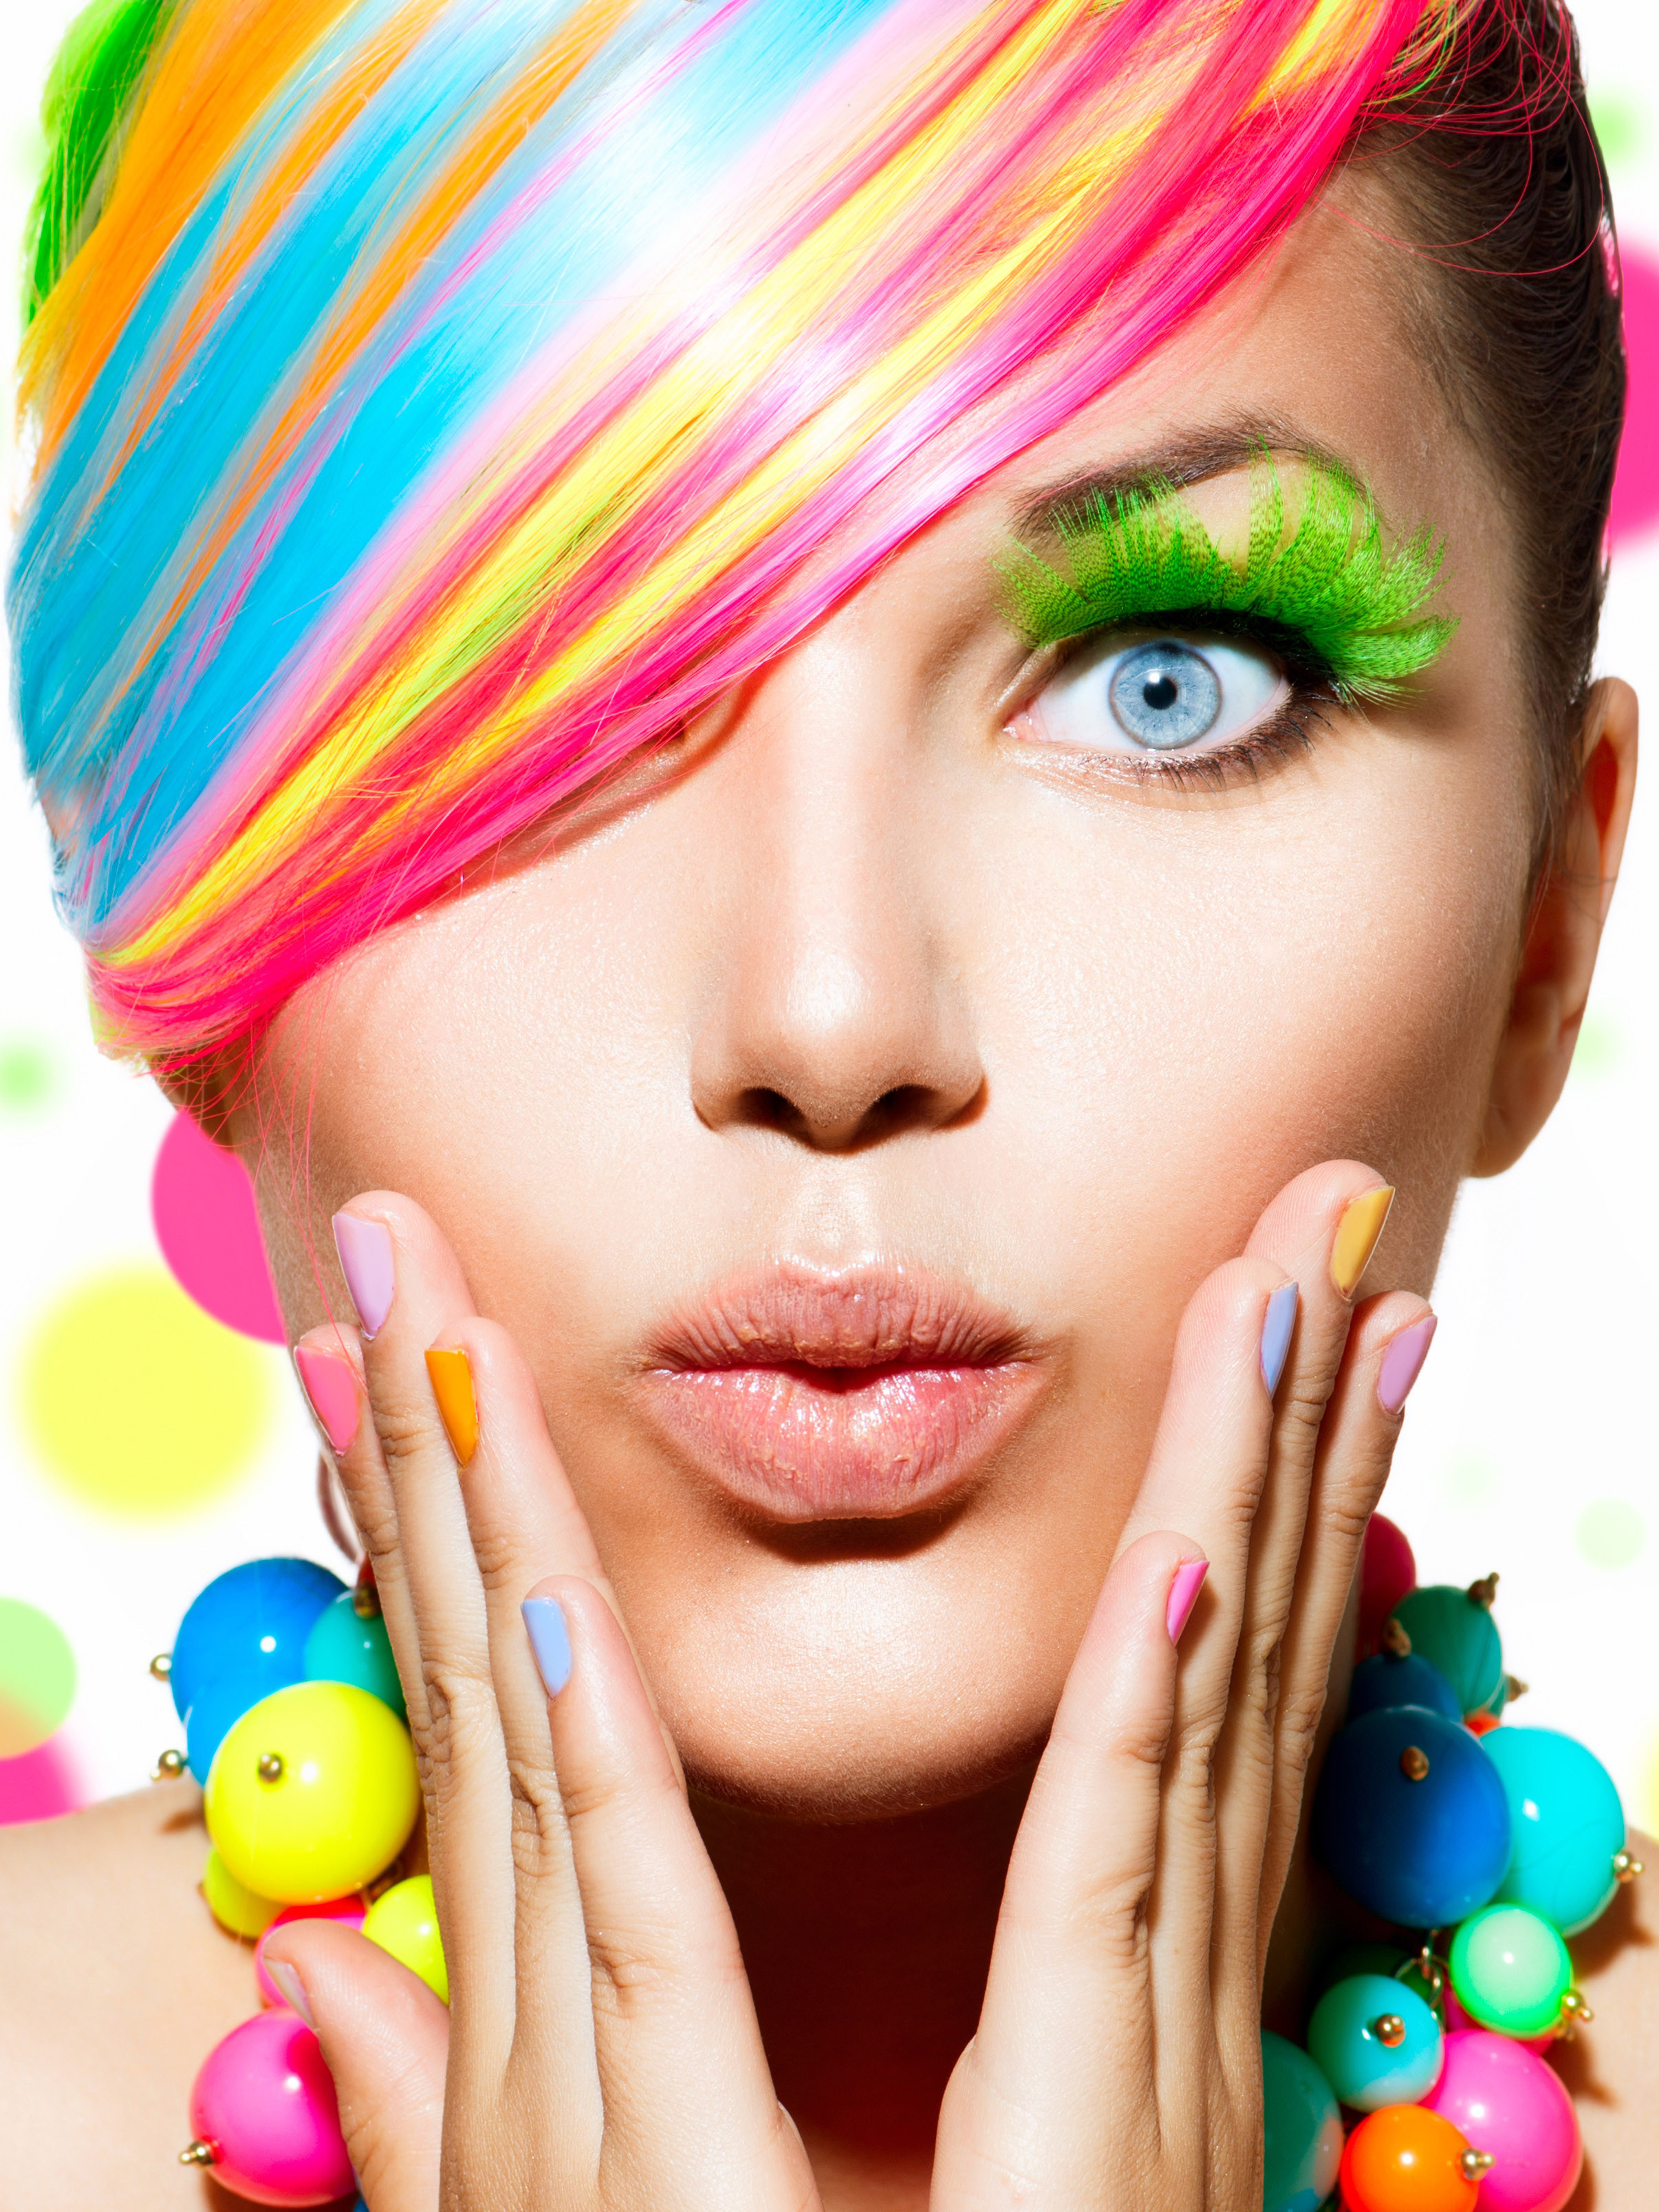 People 2412x3216 face Rainbow hair blue eyes colorful women